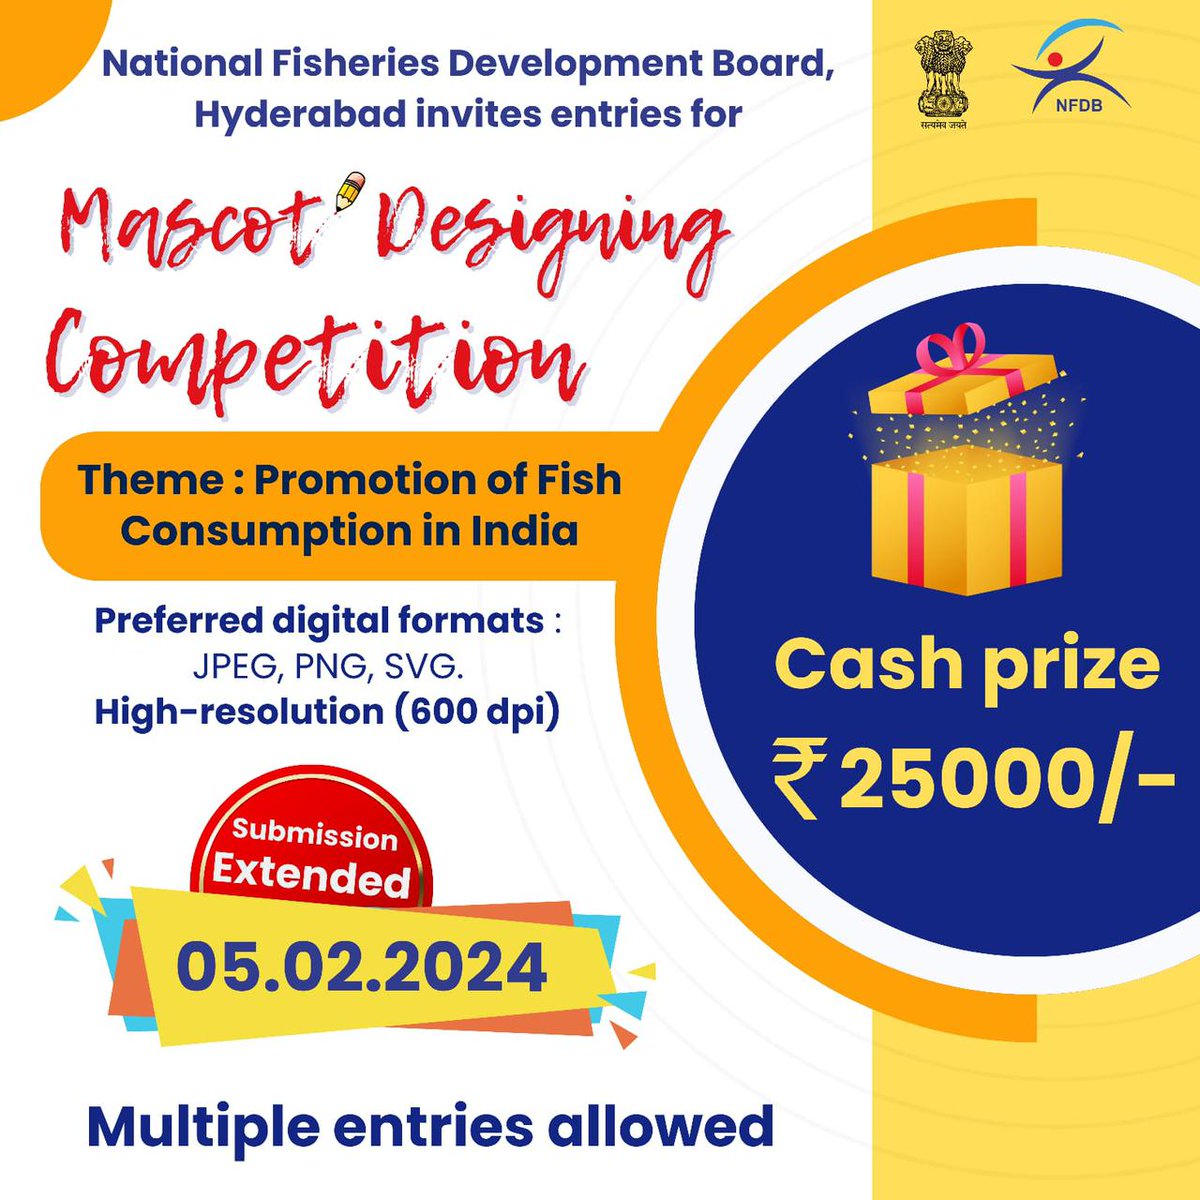 🎉 Great news fish enthusiasts! You now have more time to design the NFDB mascot and can submit multiple entries.  #fishinindia #NFDBmascot #designcompetition #domesticfishconsumption #getcreative 🐟 @FisheriesGoI @LNMurthyARS